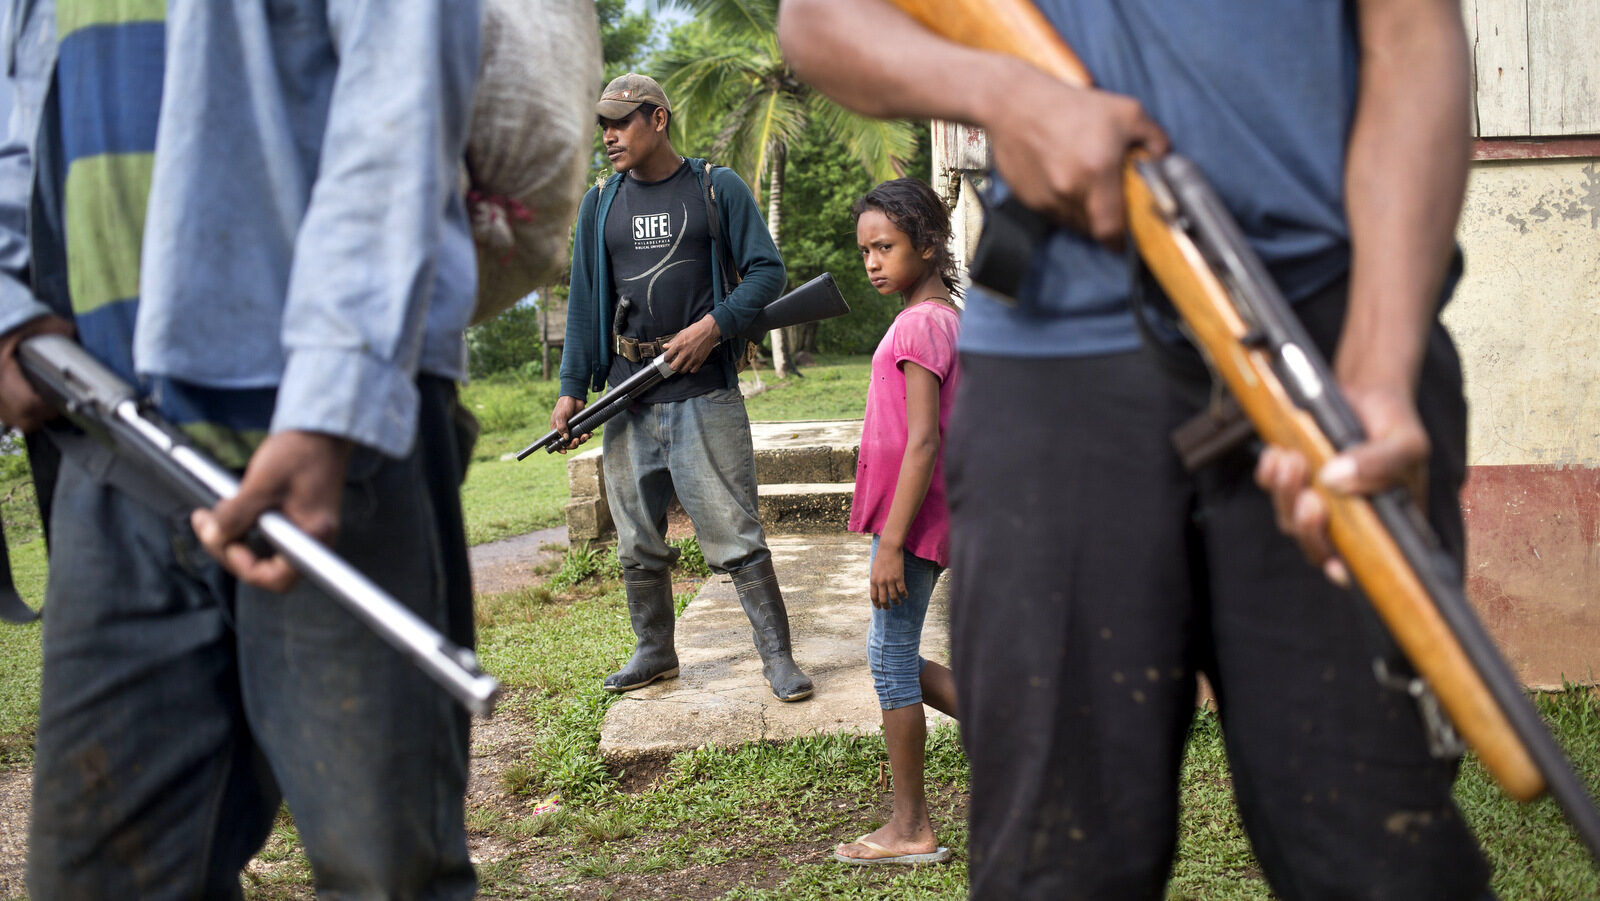 In this Sept. 19, 2015 photo, a Miskito girl walks among Miskito men armed with rifles, which they say they use to defend against attacking colonists, in La Esperanza community, Nicaragua. Miskitos have taken up arms to try to expel the wave of newcomers, who are attracted in part by the area's rich tropical hardwood groves. (AP Photo/Esteban Felix)